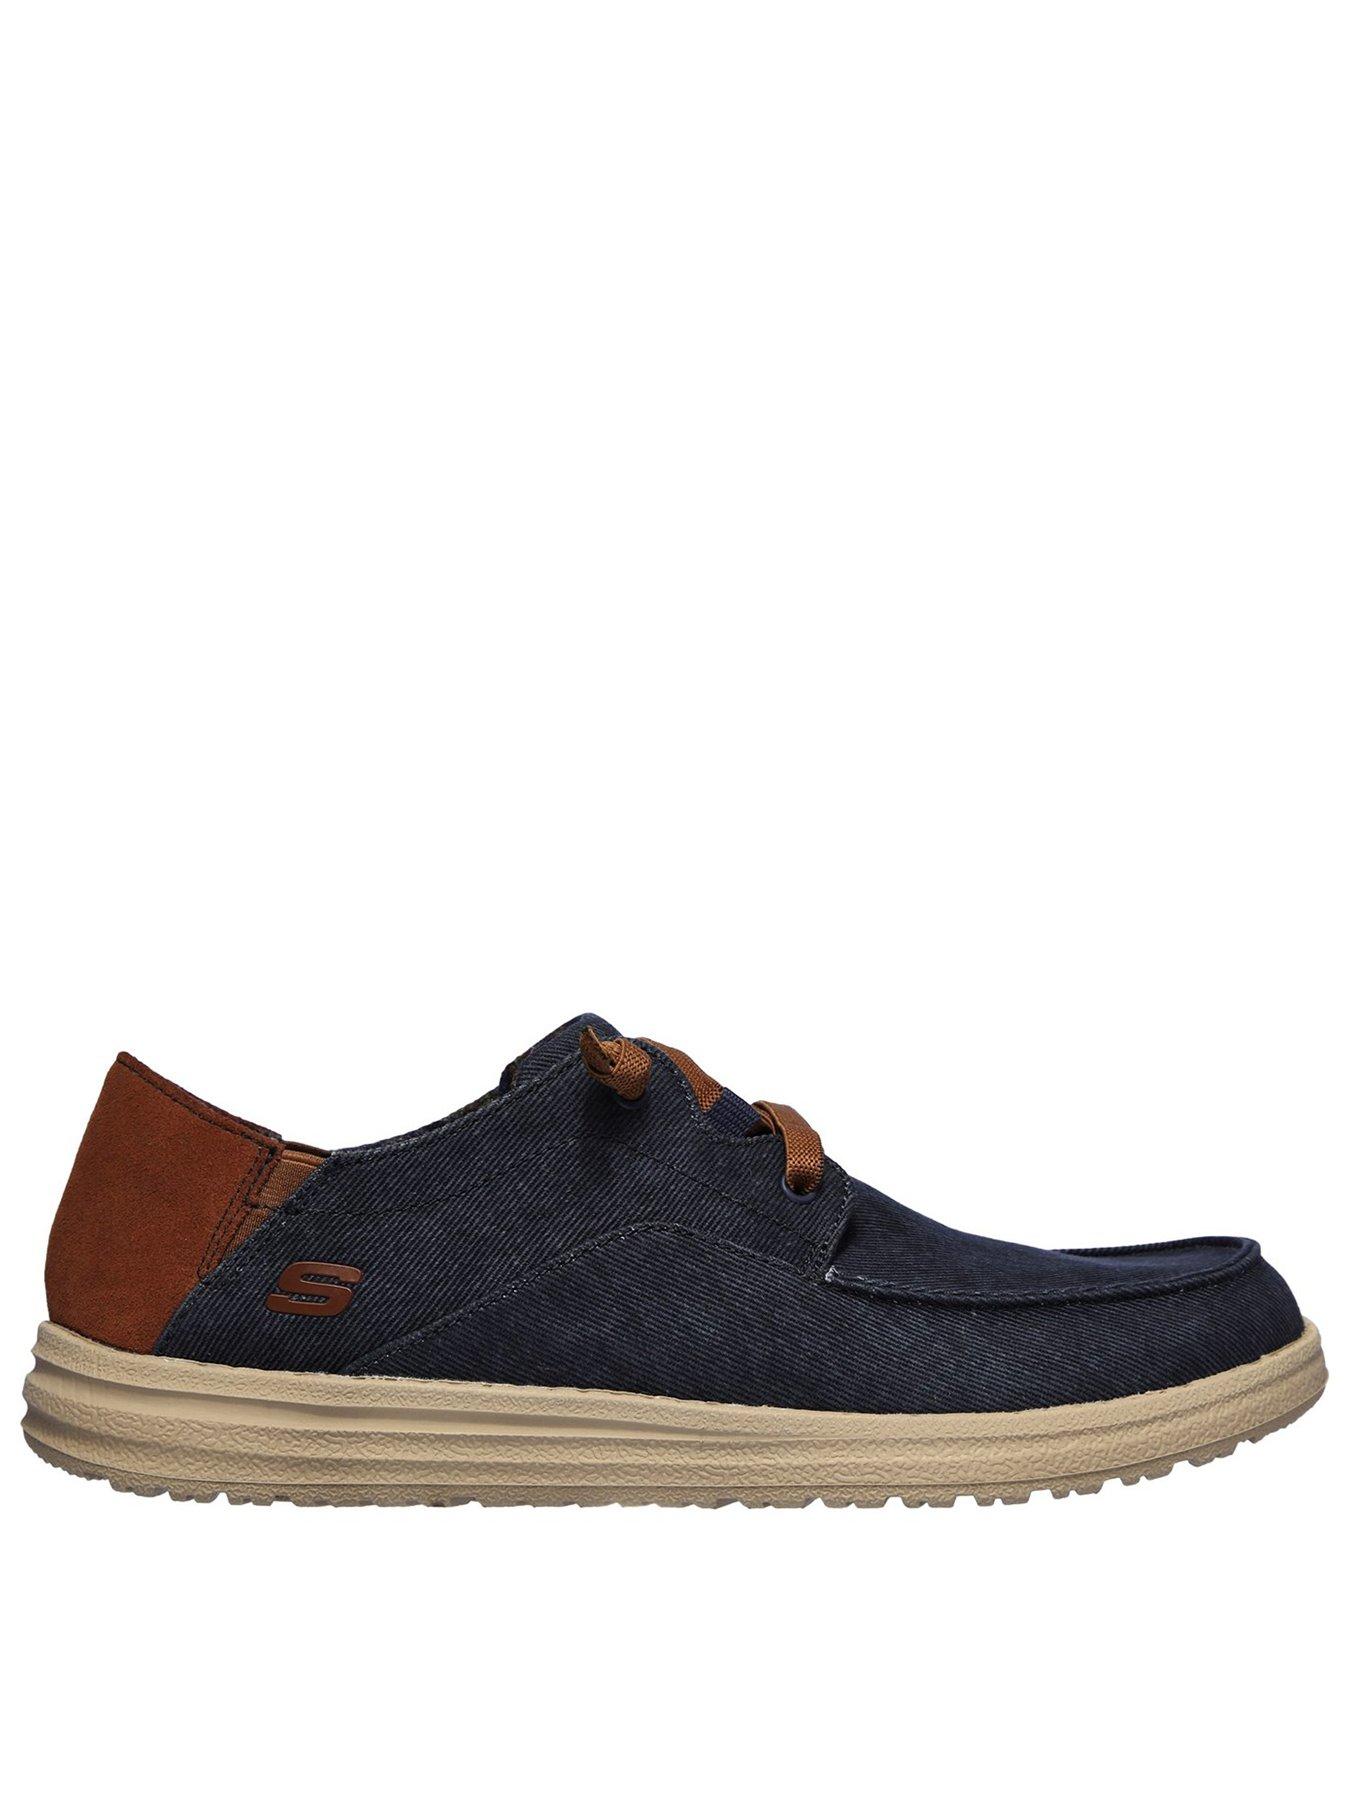 Air-cooled Goga Mat Arch Streetwear Casual Shoe - Navy